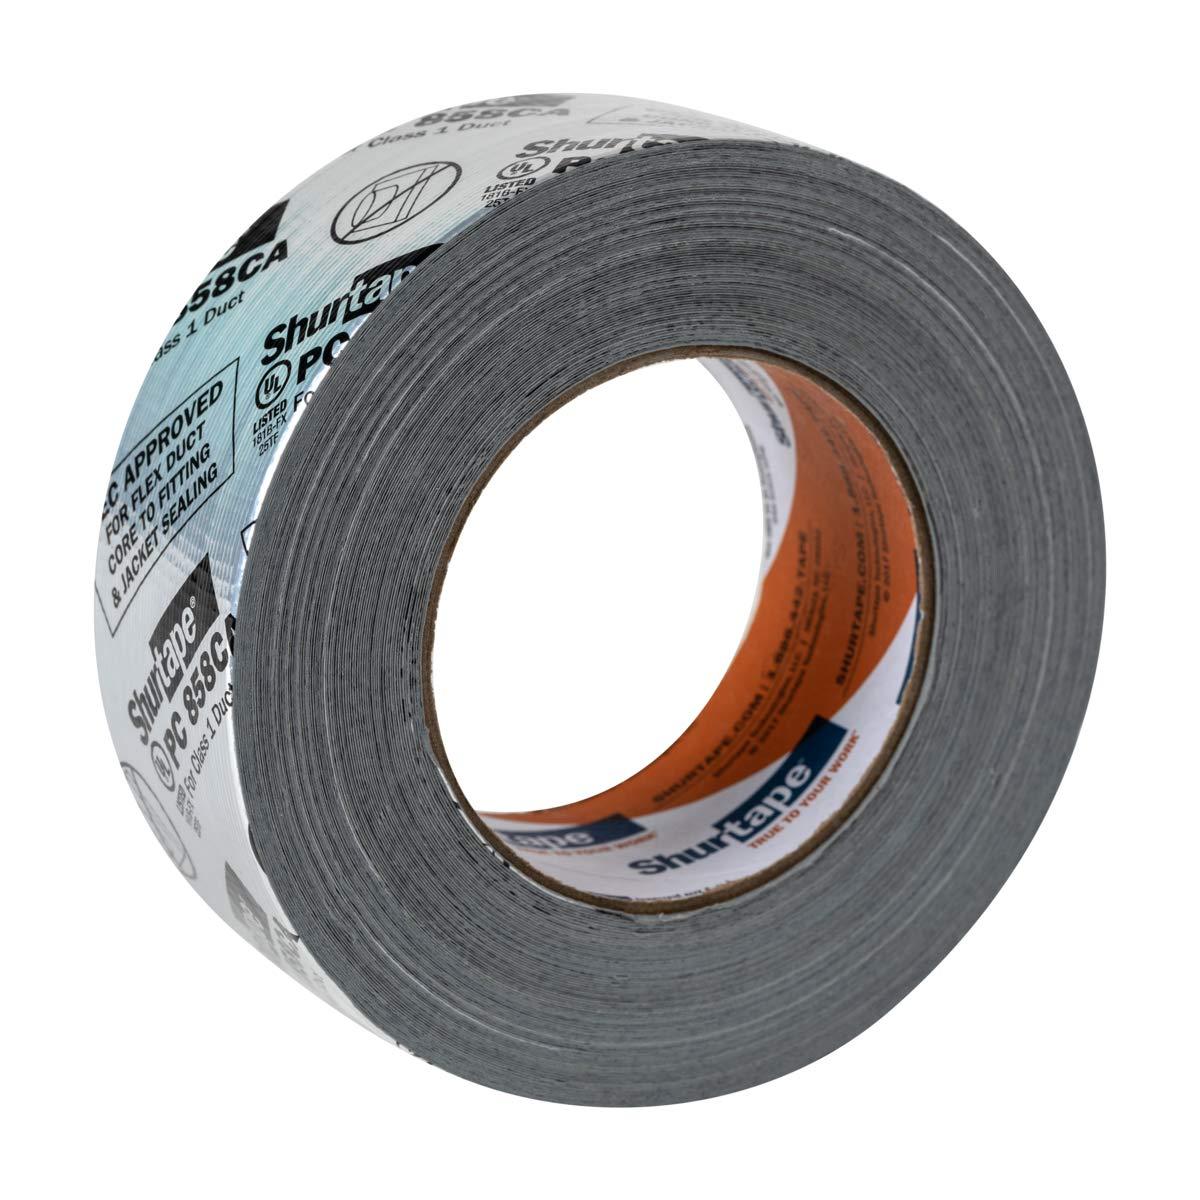 Duck Brand HVAC Duct Sealing Tape, Silver, 1.88 Inches x 30 Yards